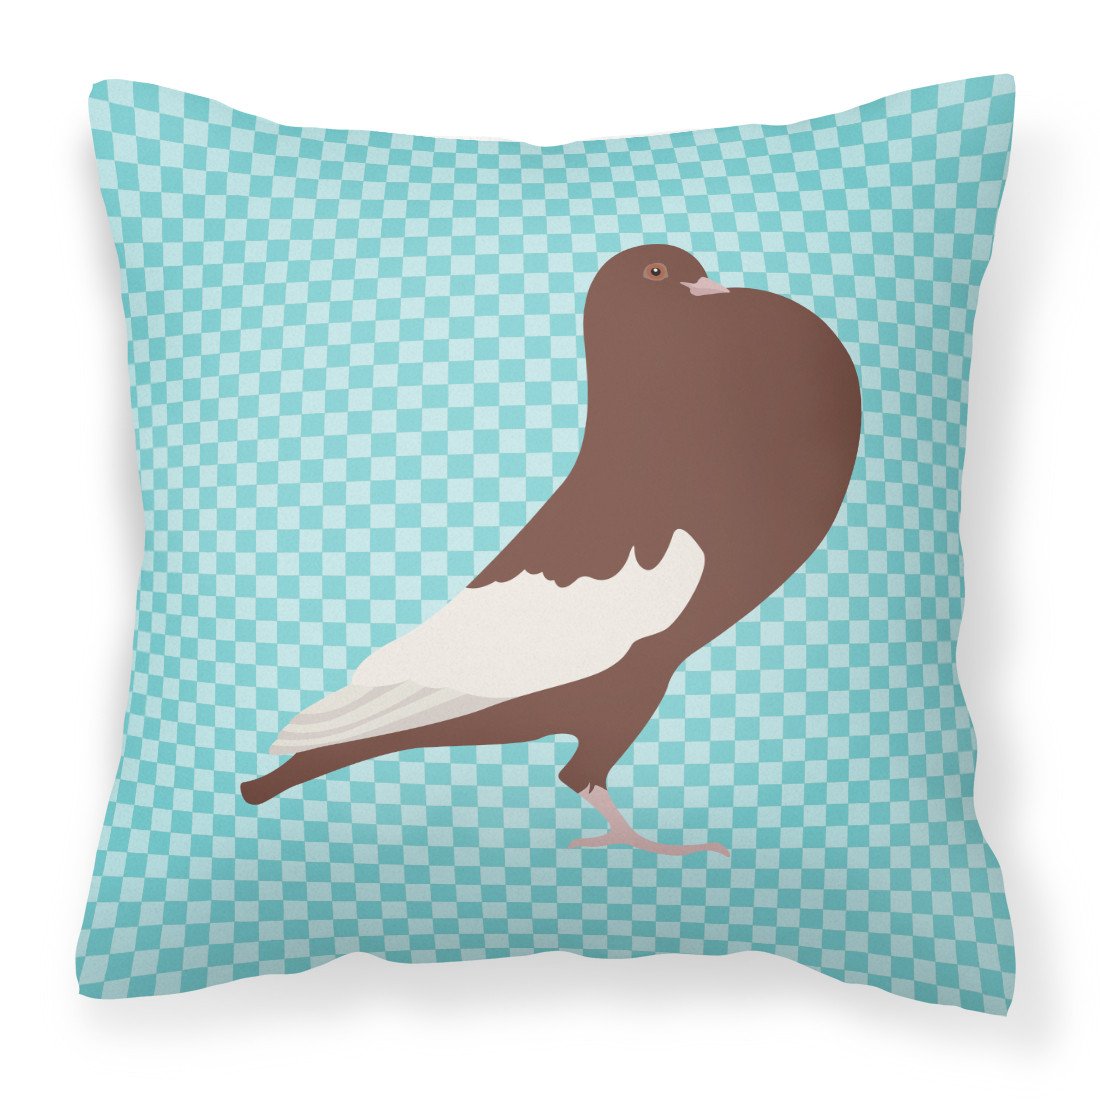 English Pouter Pigeon Blue Check Fabric Decorative Pillow BB8128PW1818 by Caroline's Treasures